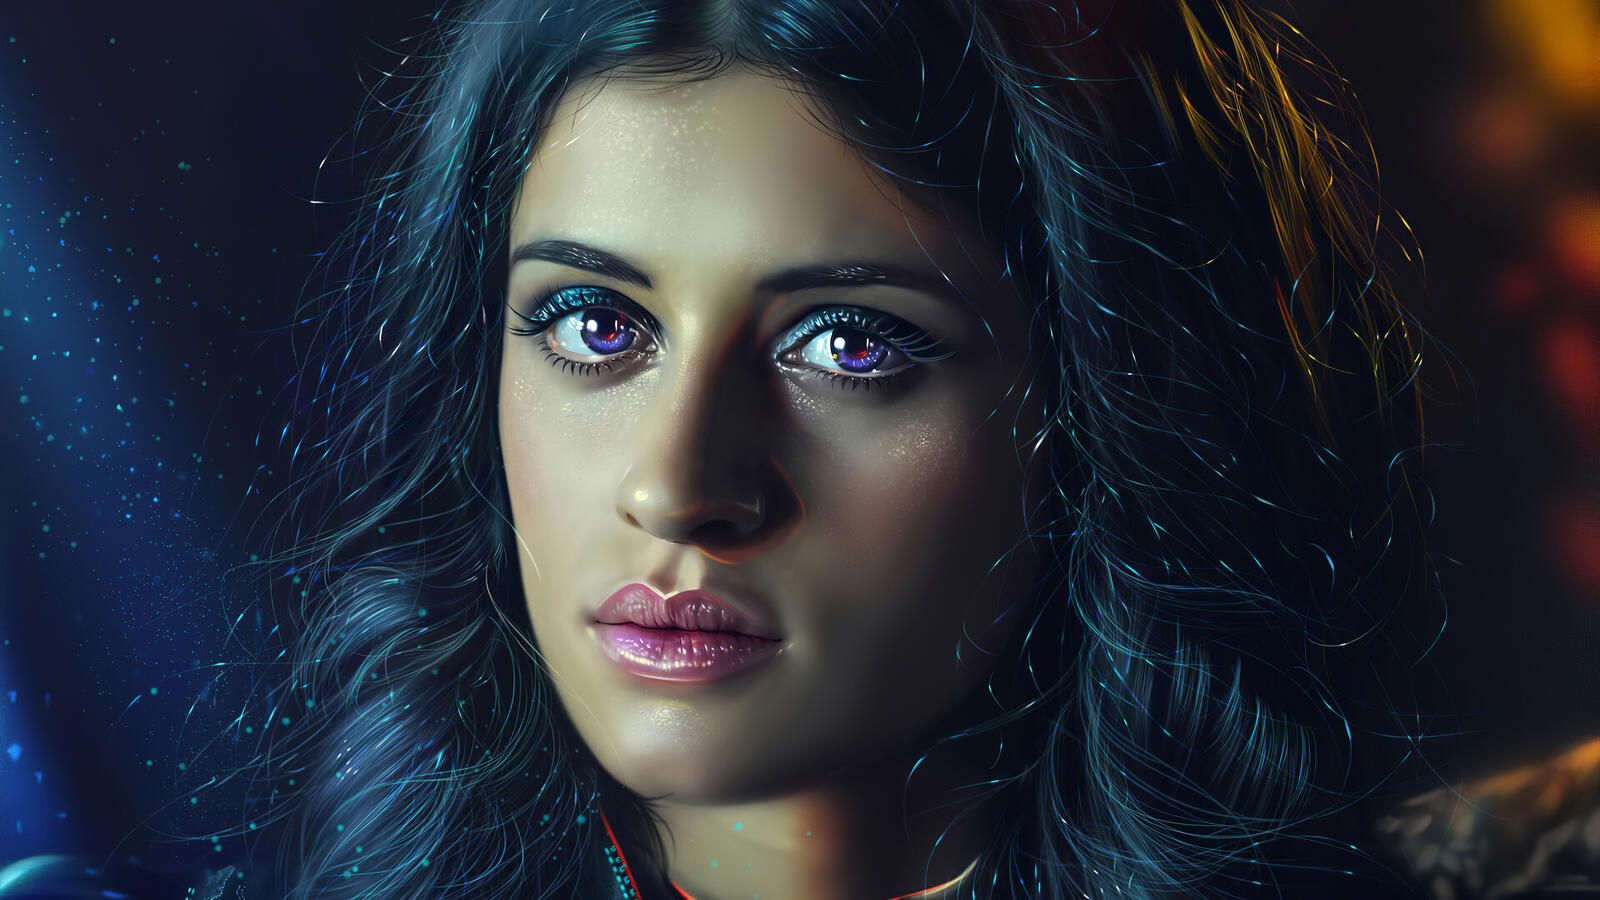 Wallpapers the witcher TV show anya chalotra on the desktop